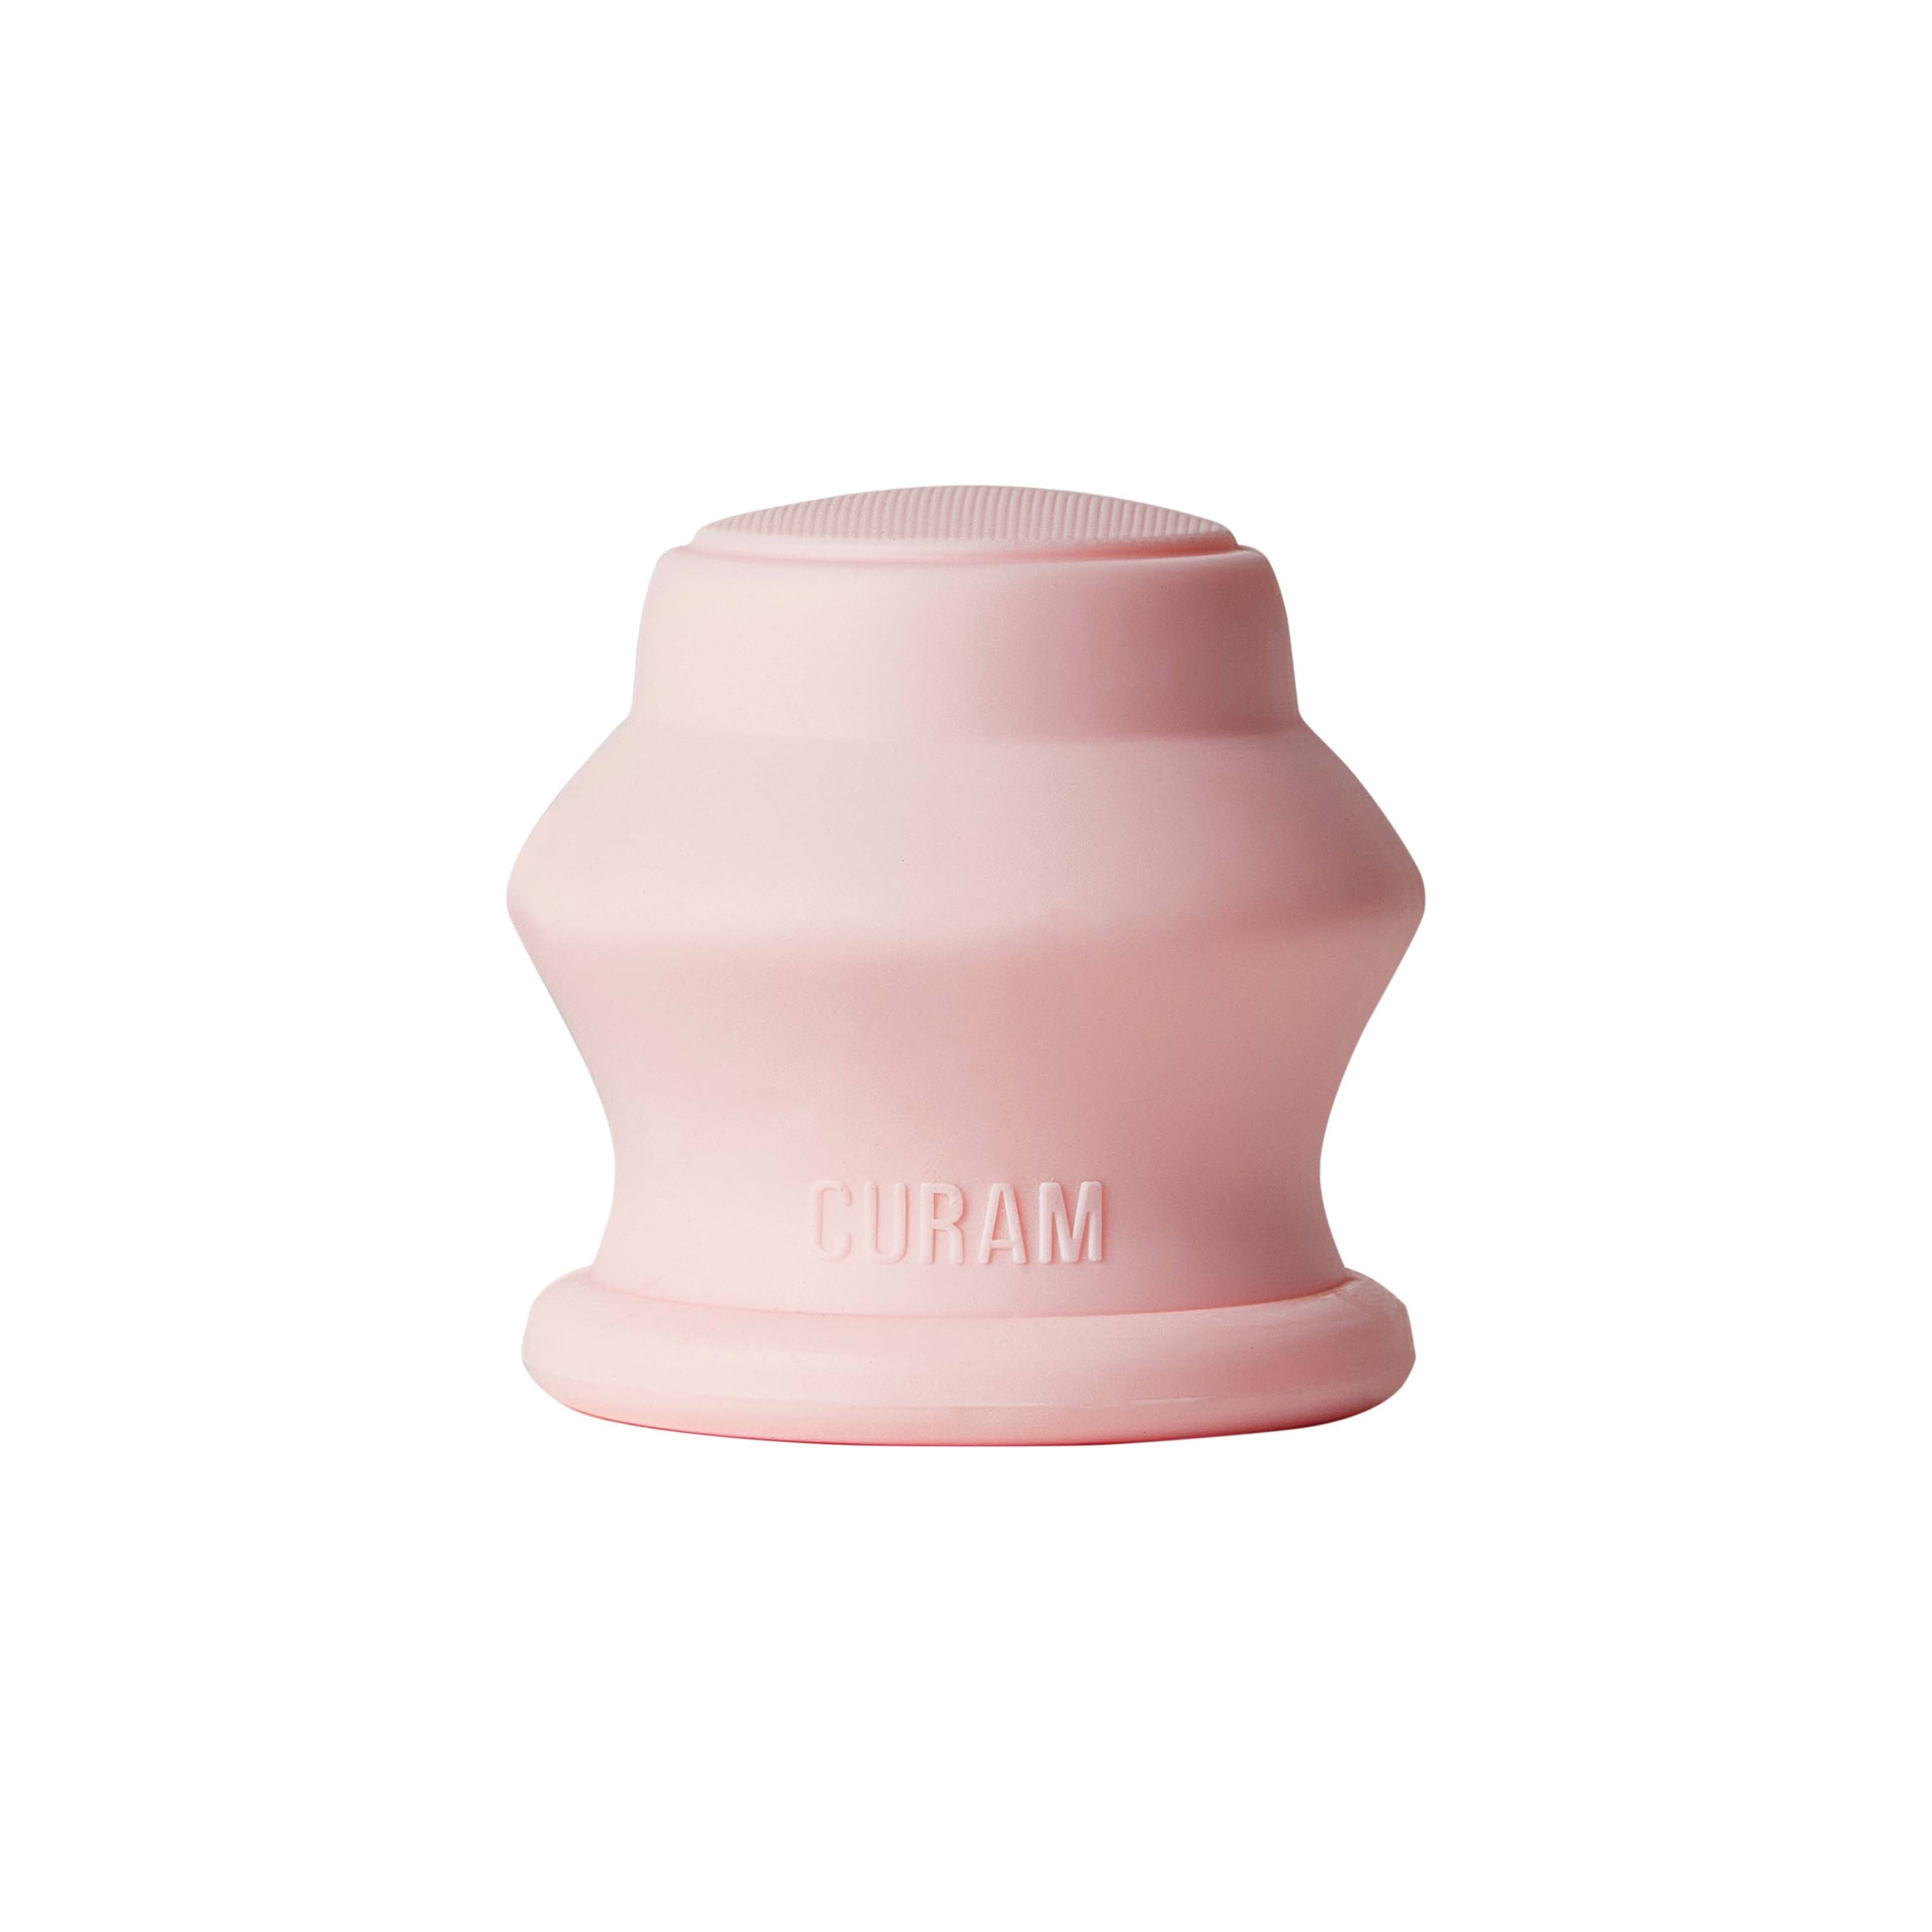 Curam Dynamic Massage Cup Curing Pink